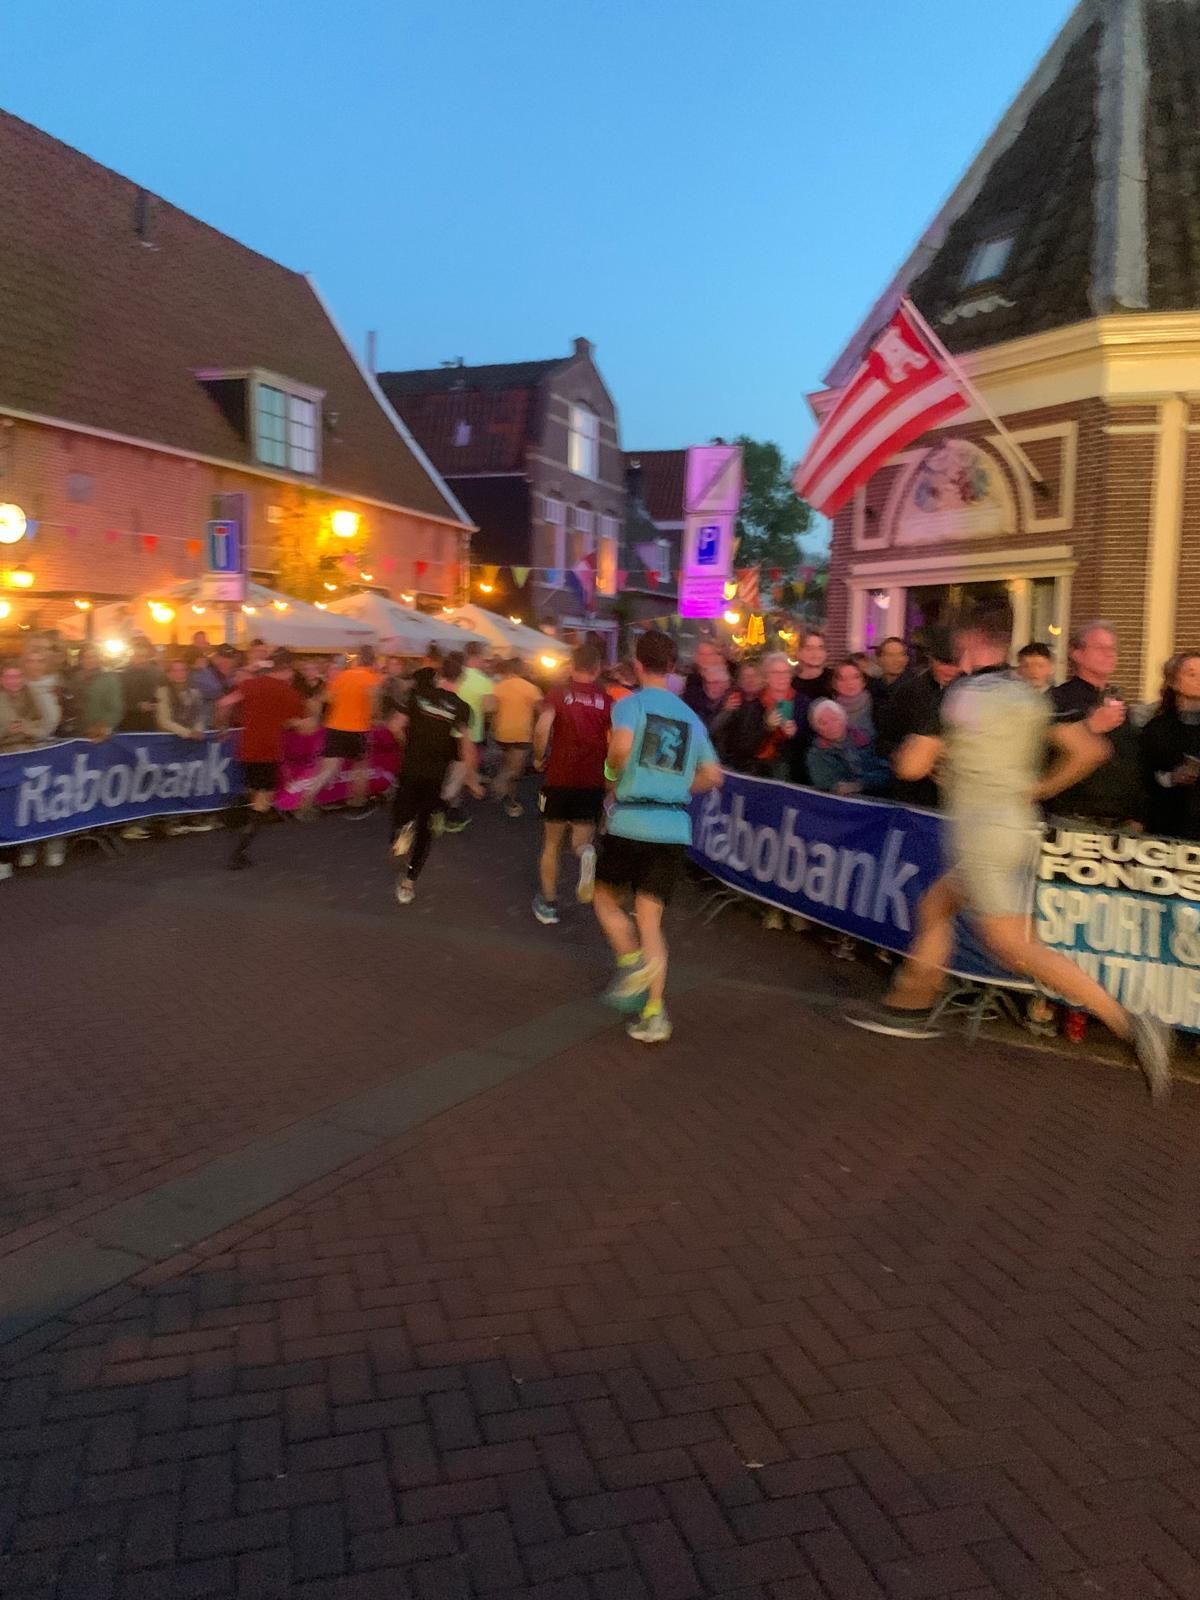 A group of people running down a street with rabobank banners